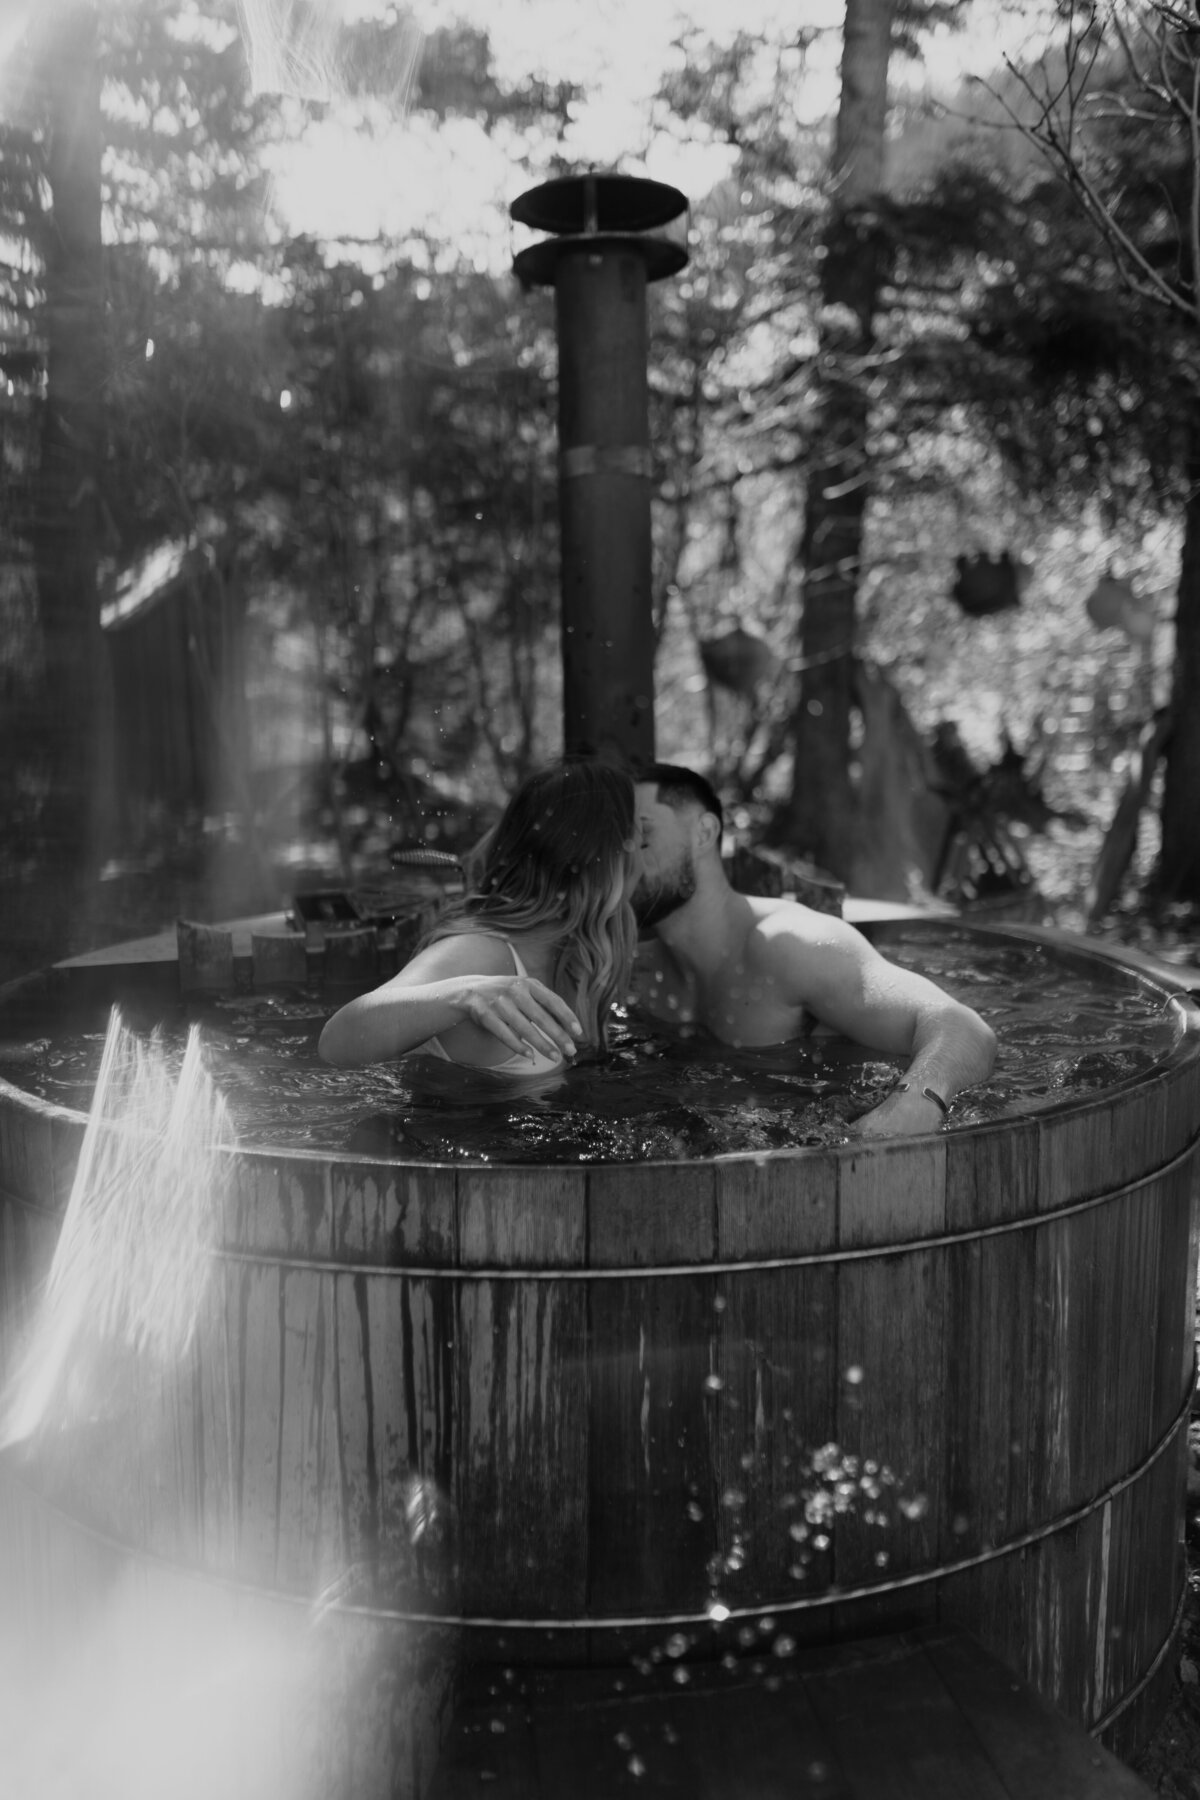 black and white image couple embracing in tub